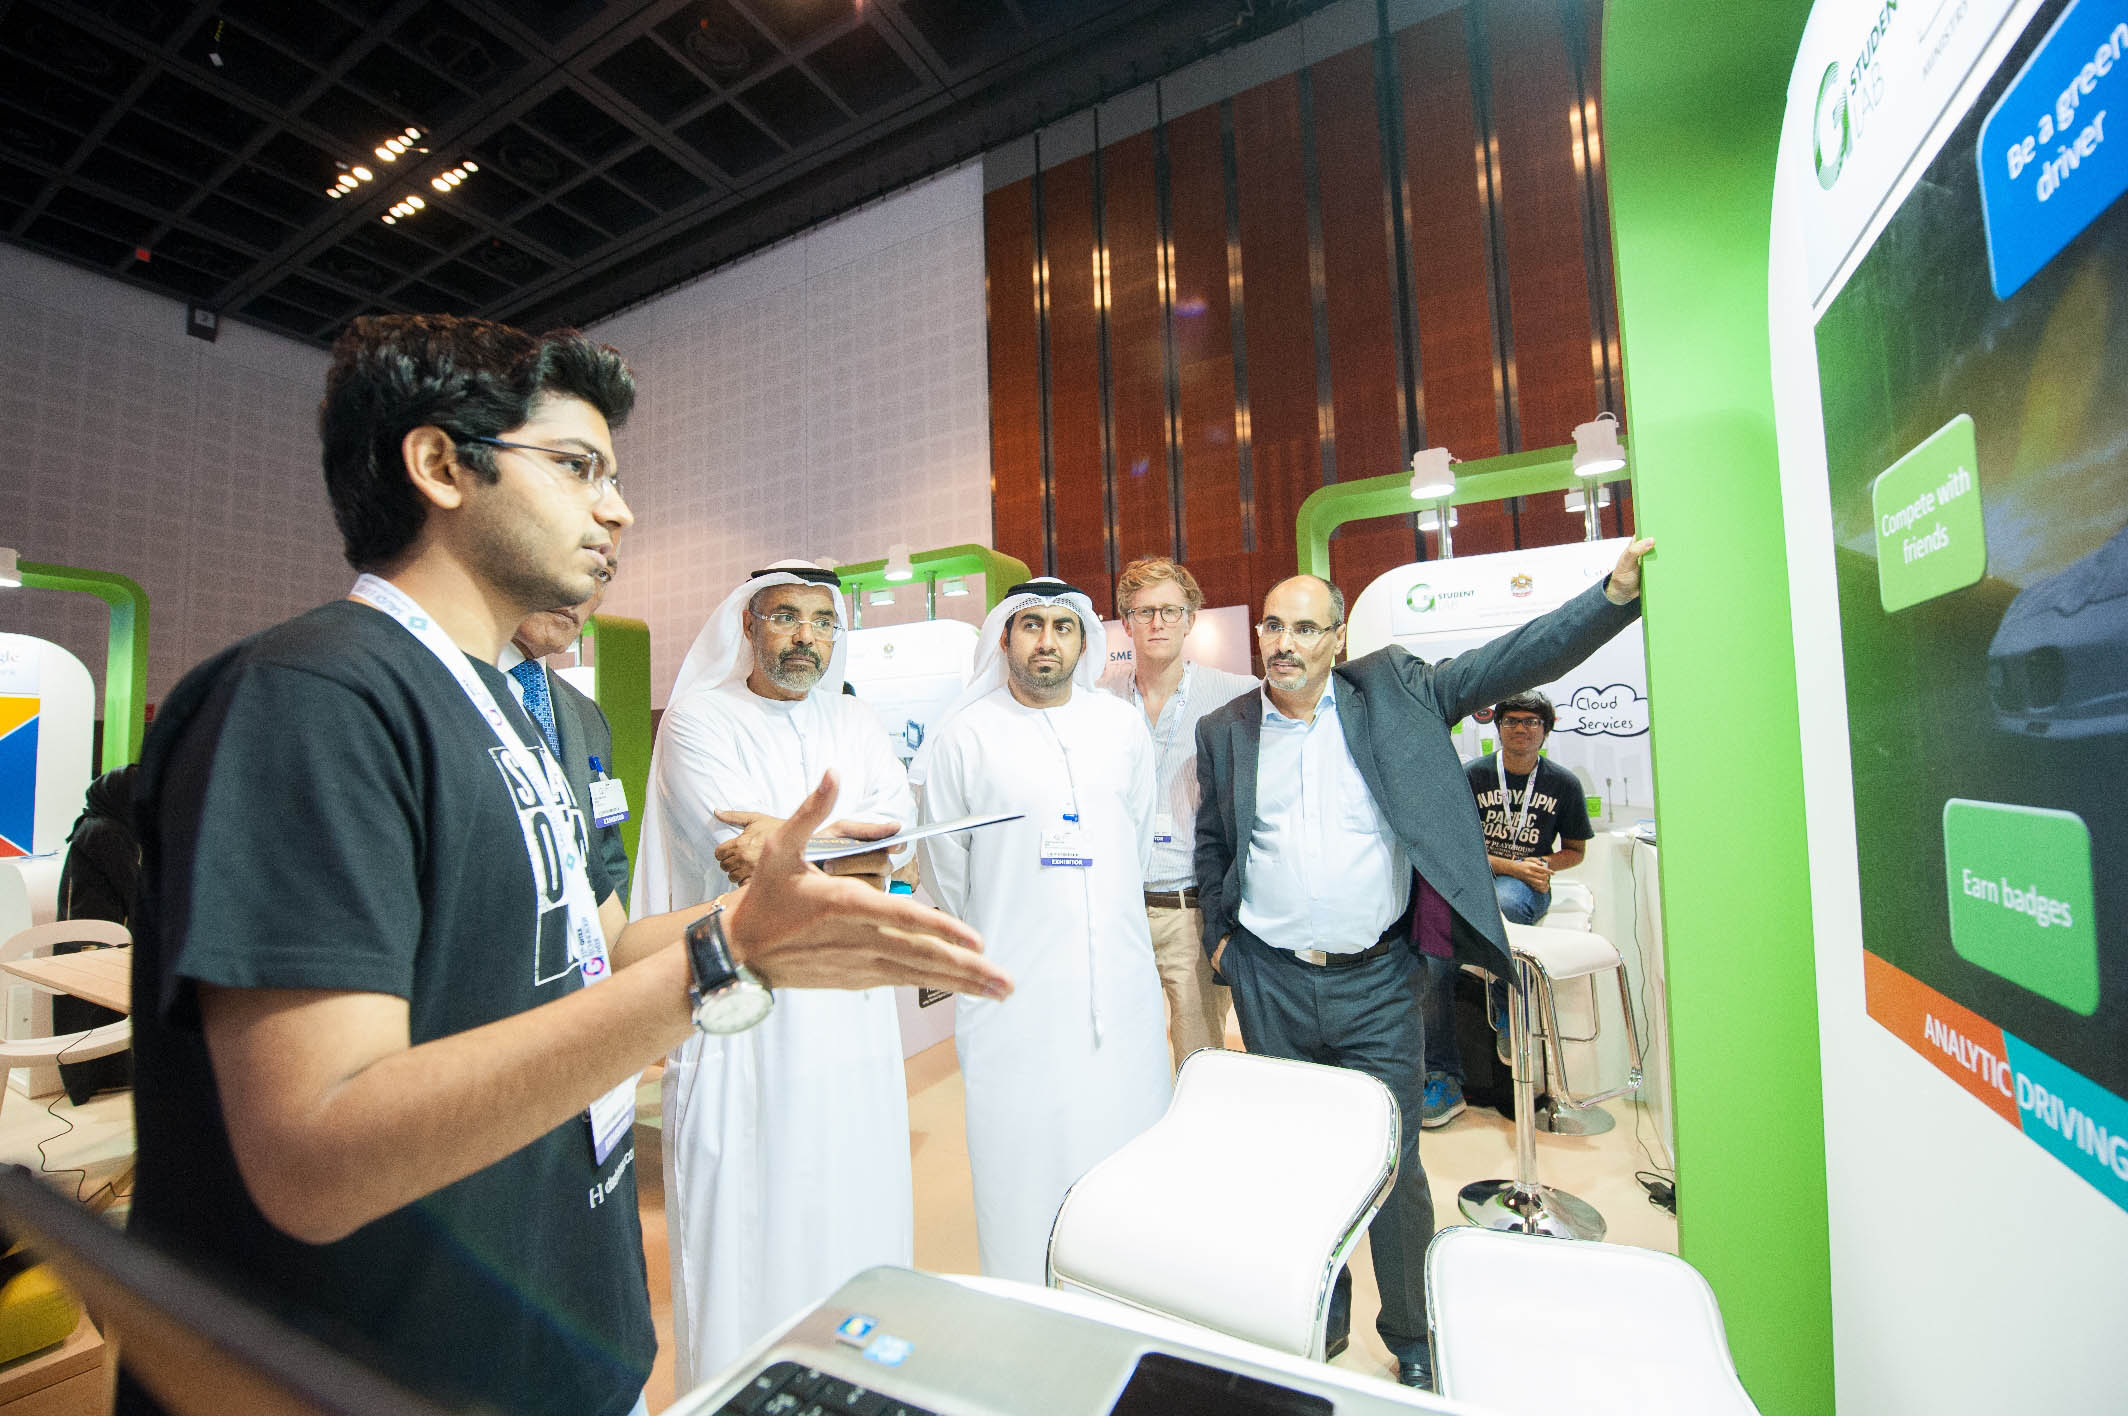 UAE Ministry of Presidential Affairs & Google judge student projects